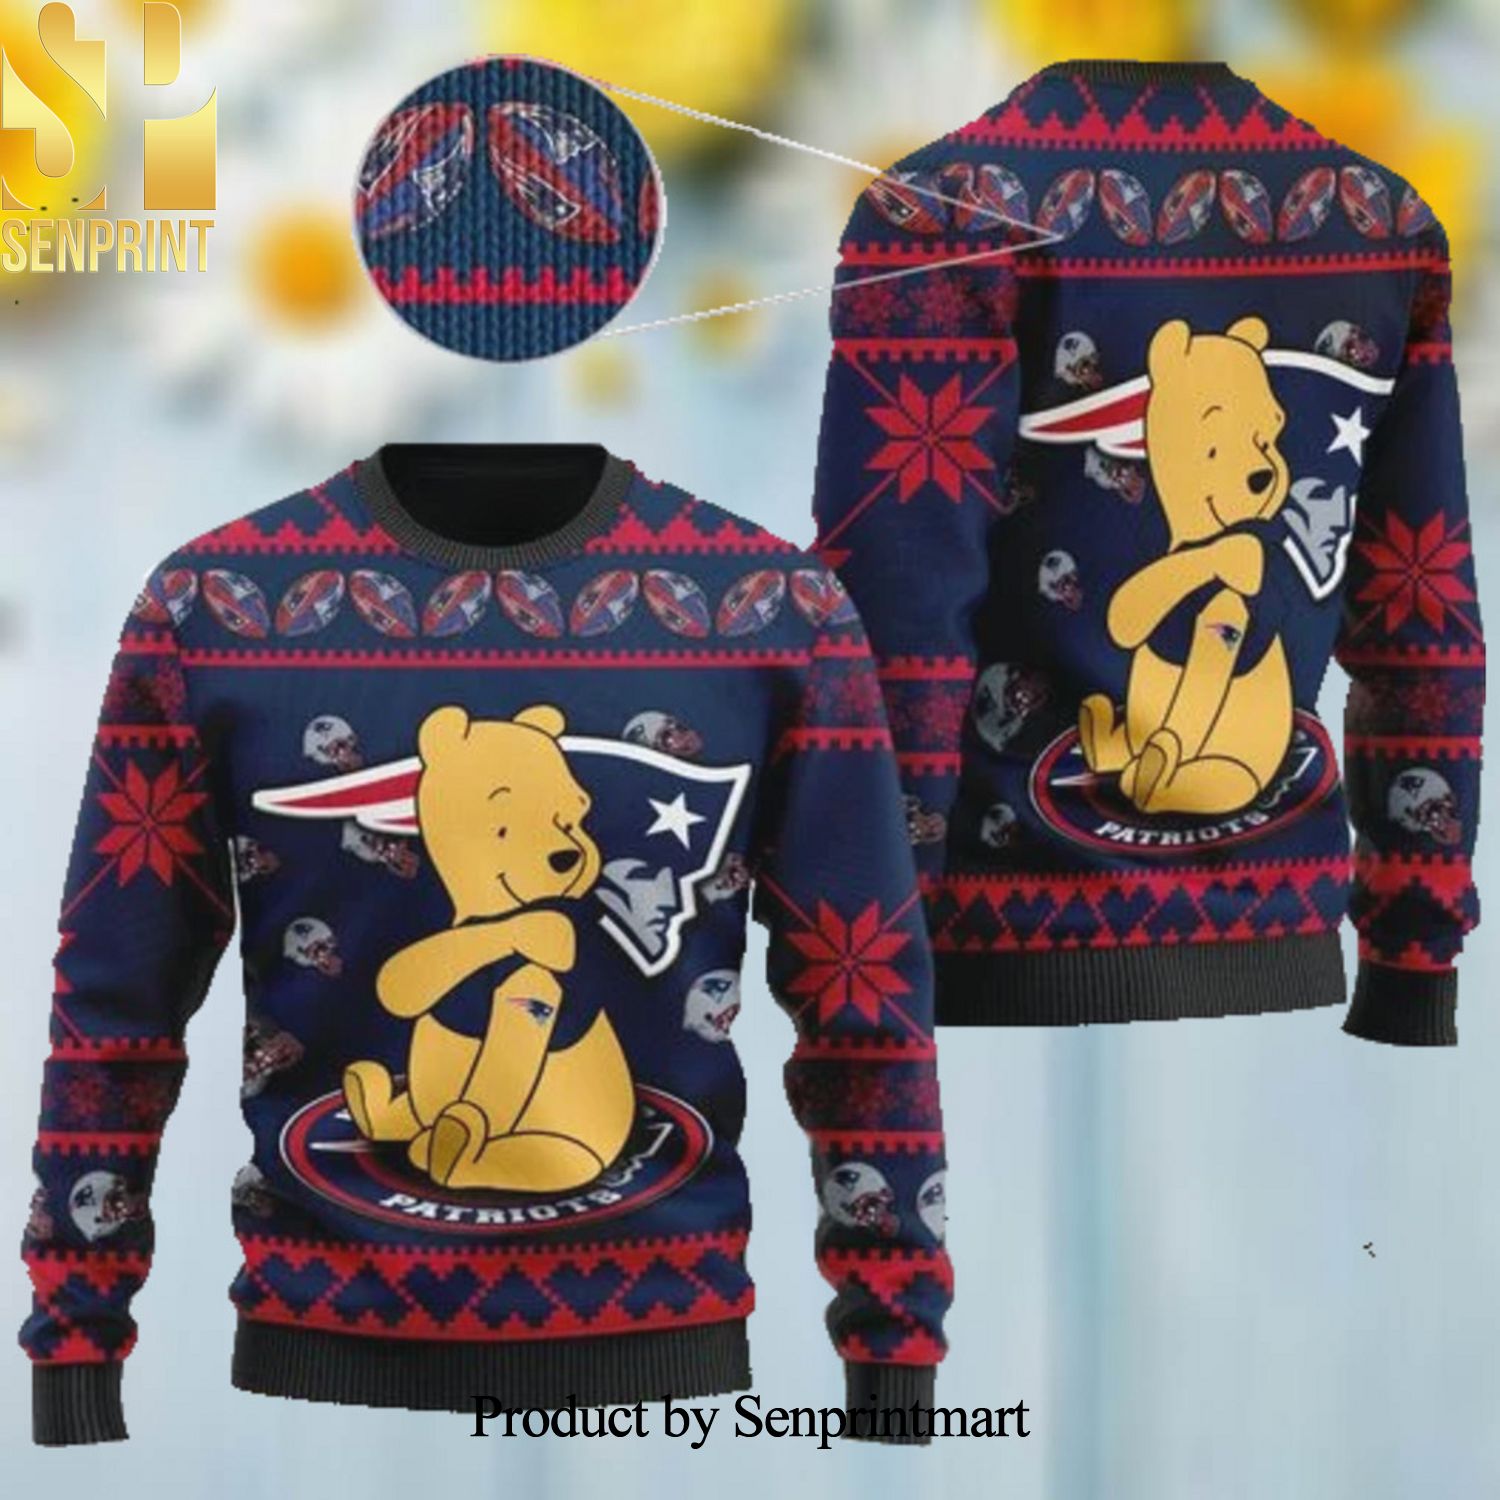 New England Patriots NFL American Football Team Logo Cute Winnie The Pooh Bear Christmas Ugly Wool Knitted Sweater